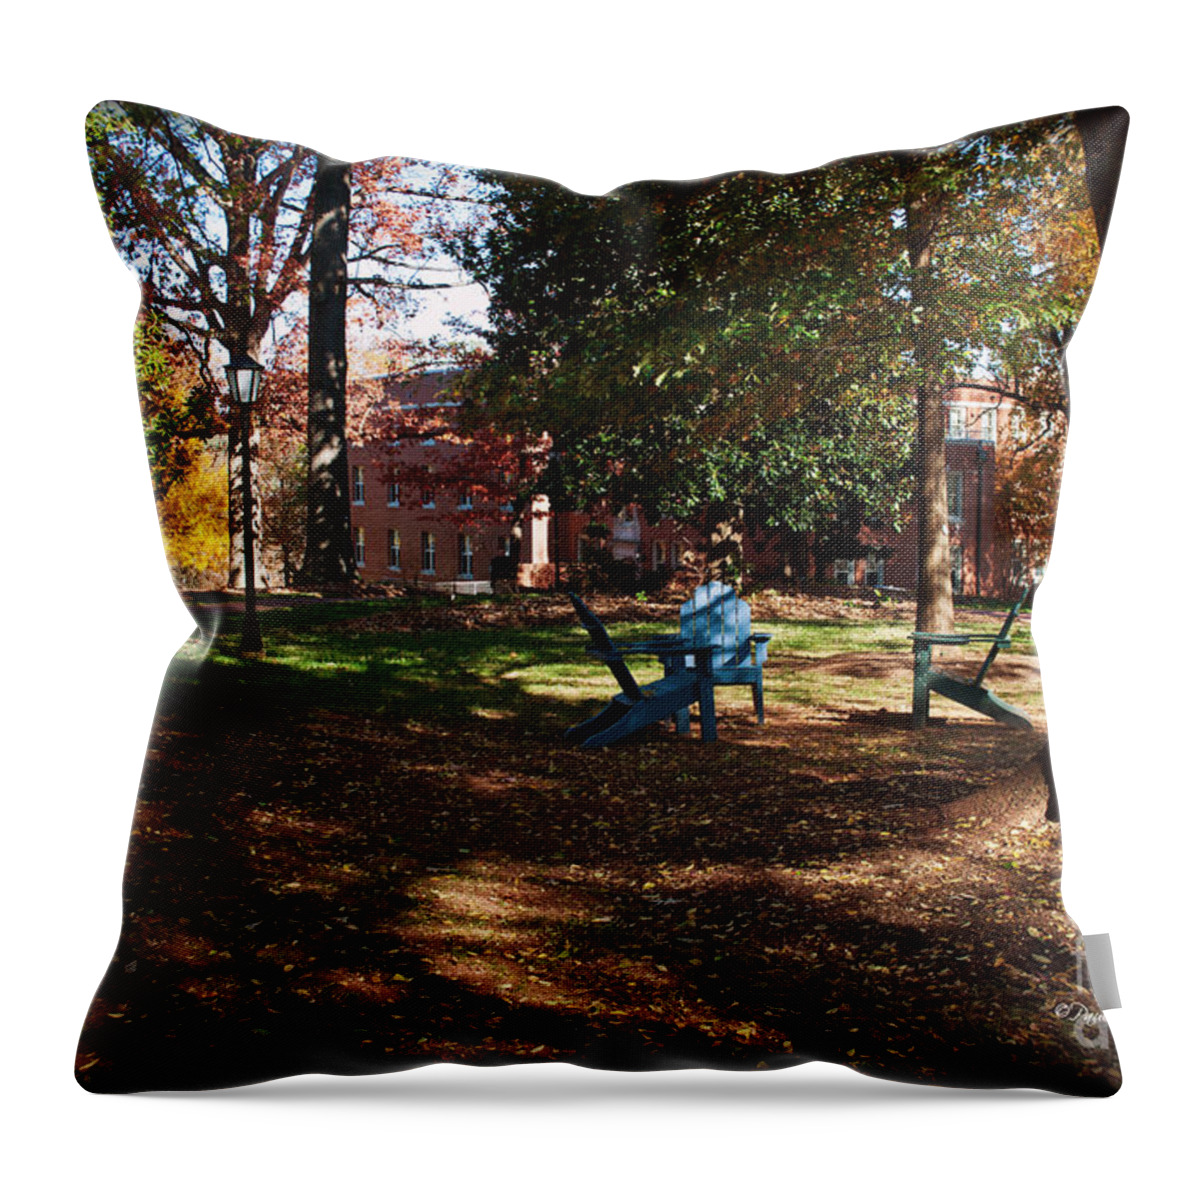 Art Throw Pillow featuring the photograph Adirondack Chairs 2 - Davidson College by Paulette B Wright